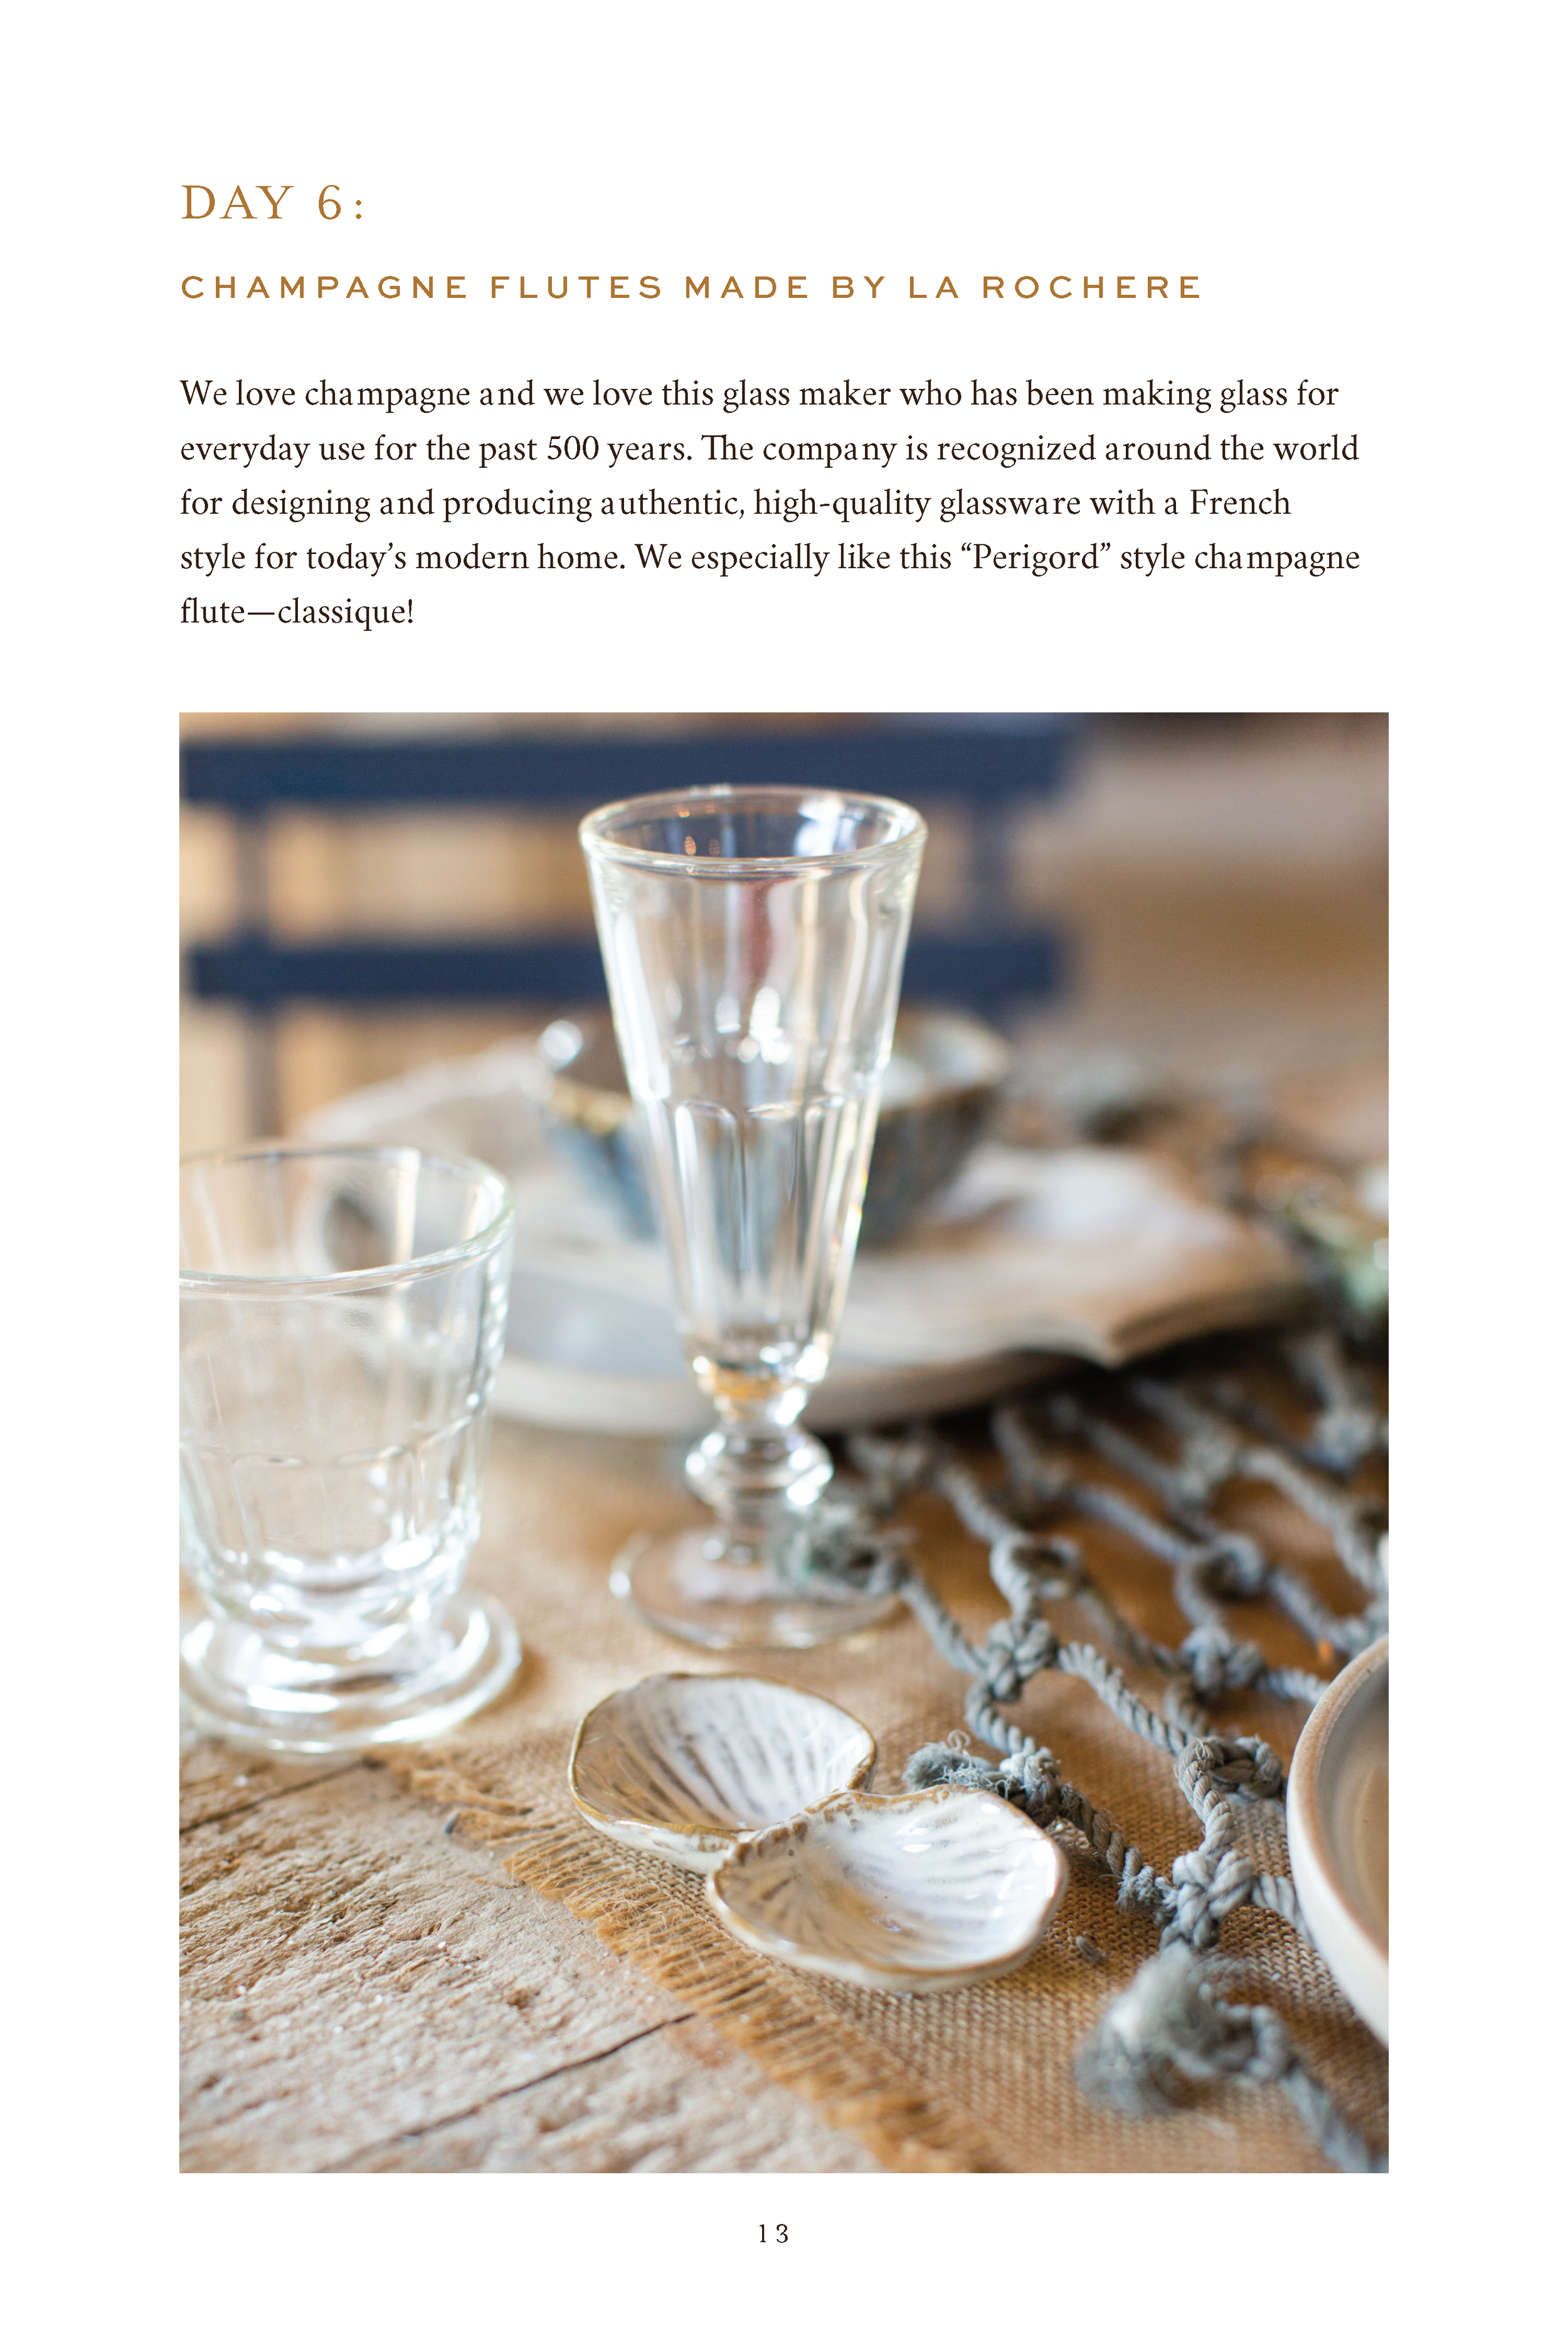 ChateauSonoma_HolidayLookbook_19_pages (1)_Page_14.png